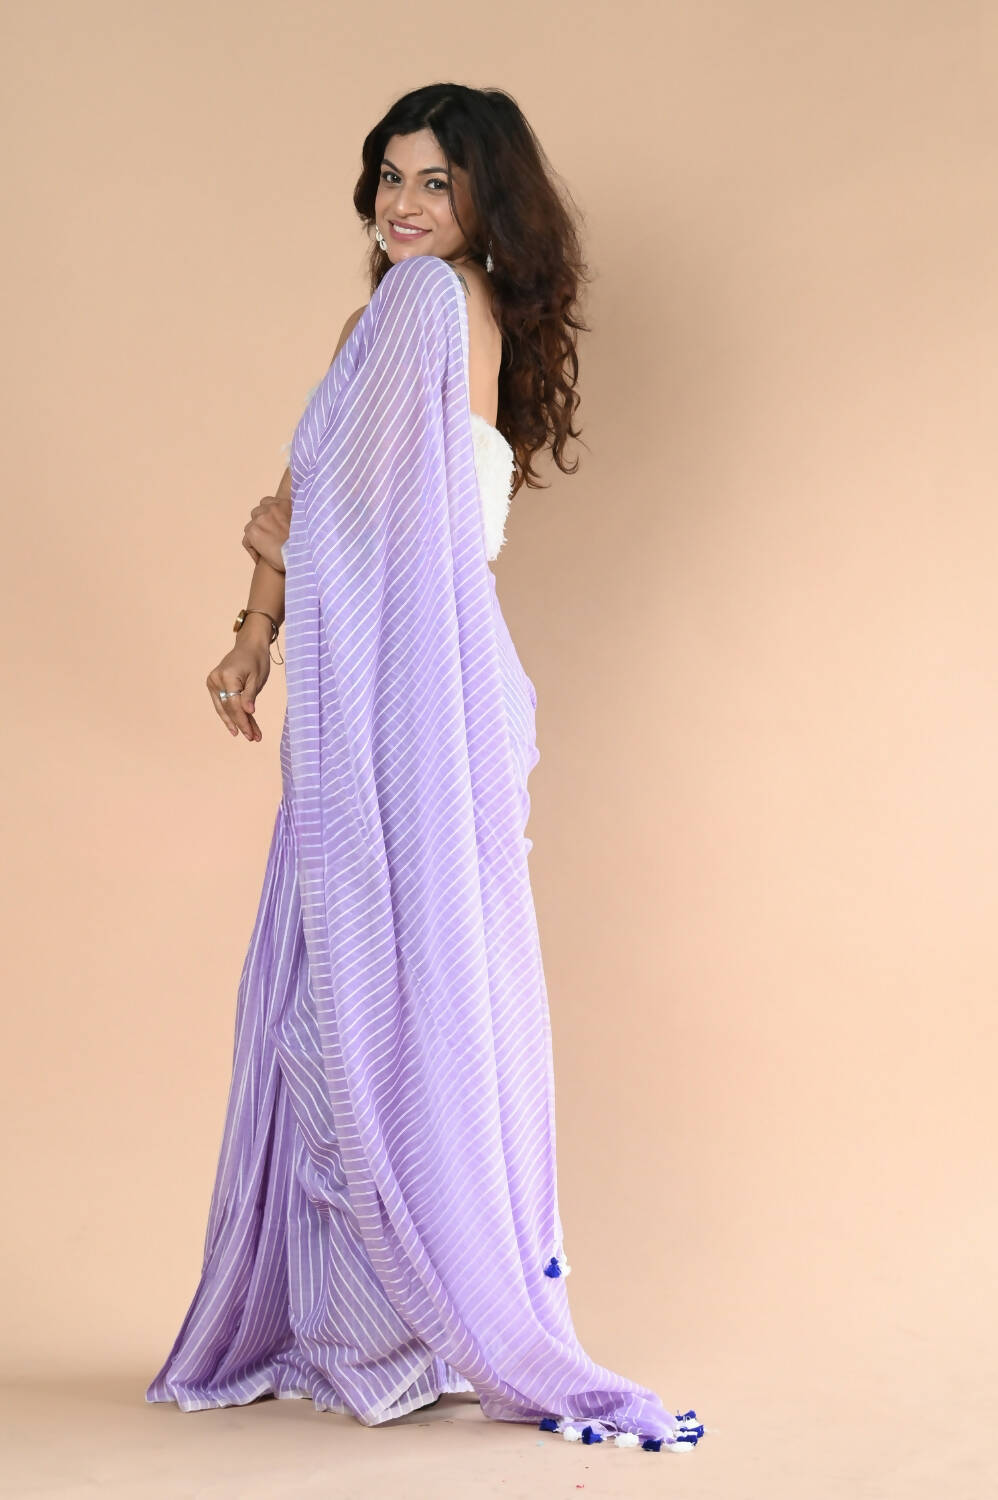 Very Much Indian Designer Pure Cotton Saree With All Over Linear Stripes - Lavender - Distacart